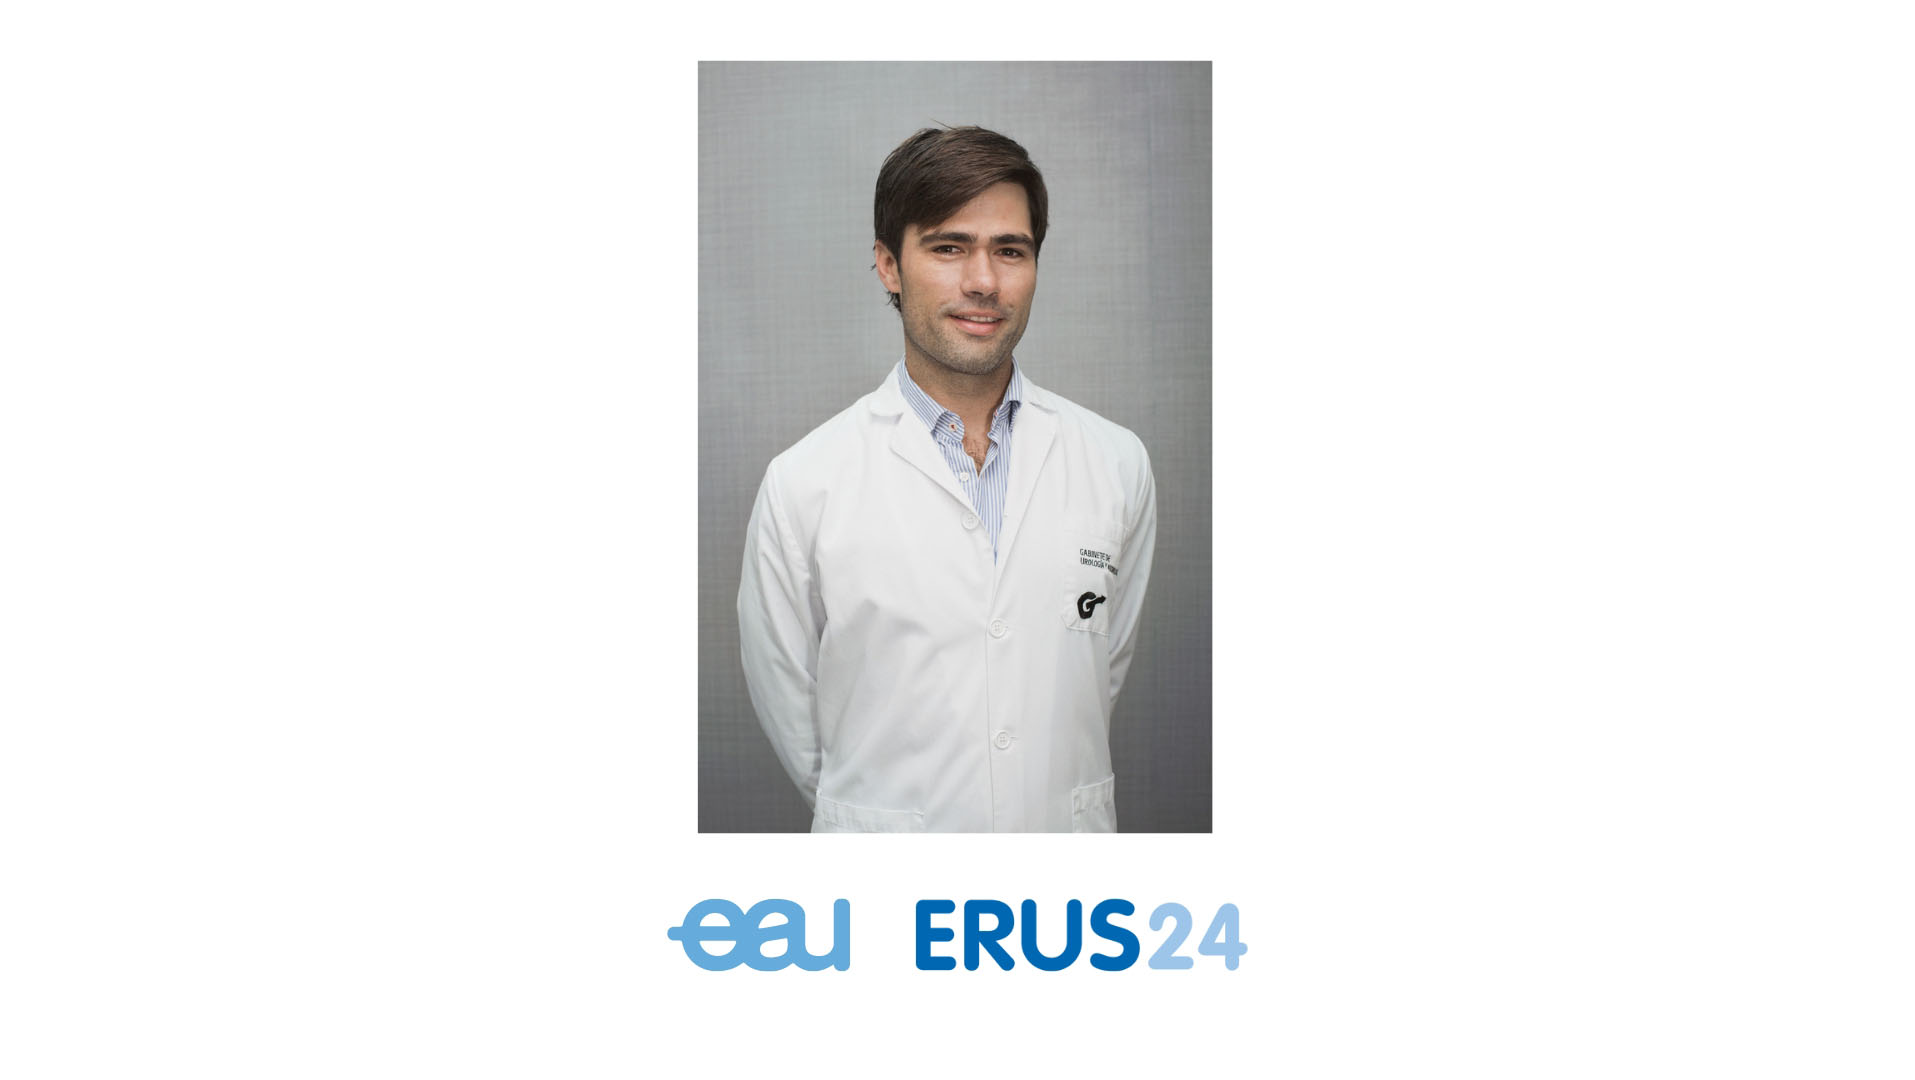 Dr. Pablo Juárez del Dago, director of our center, appointed Head of Technology of the ERUS of the European Association of Urology.